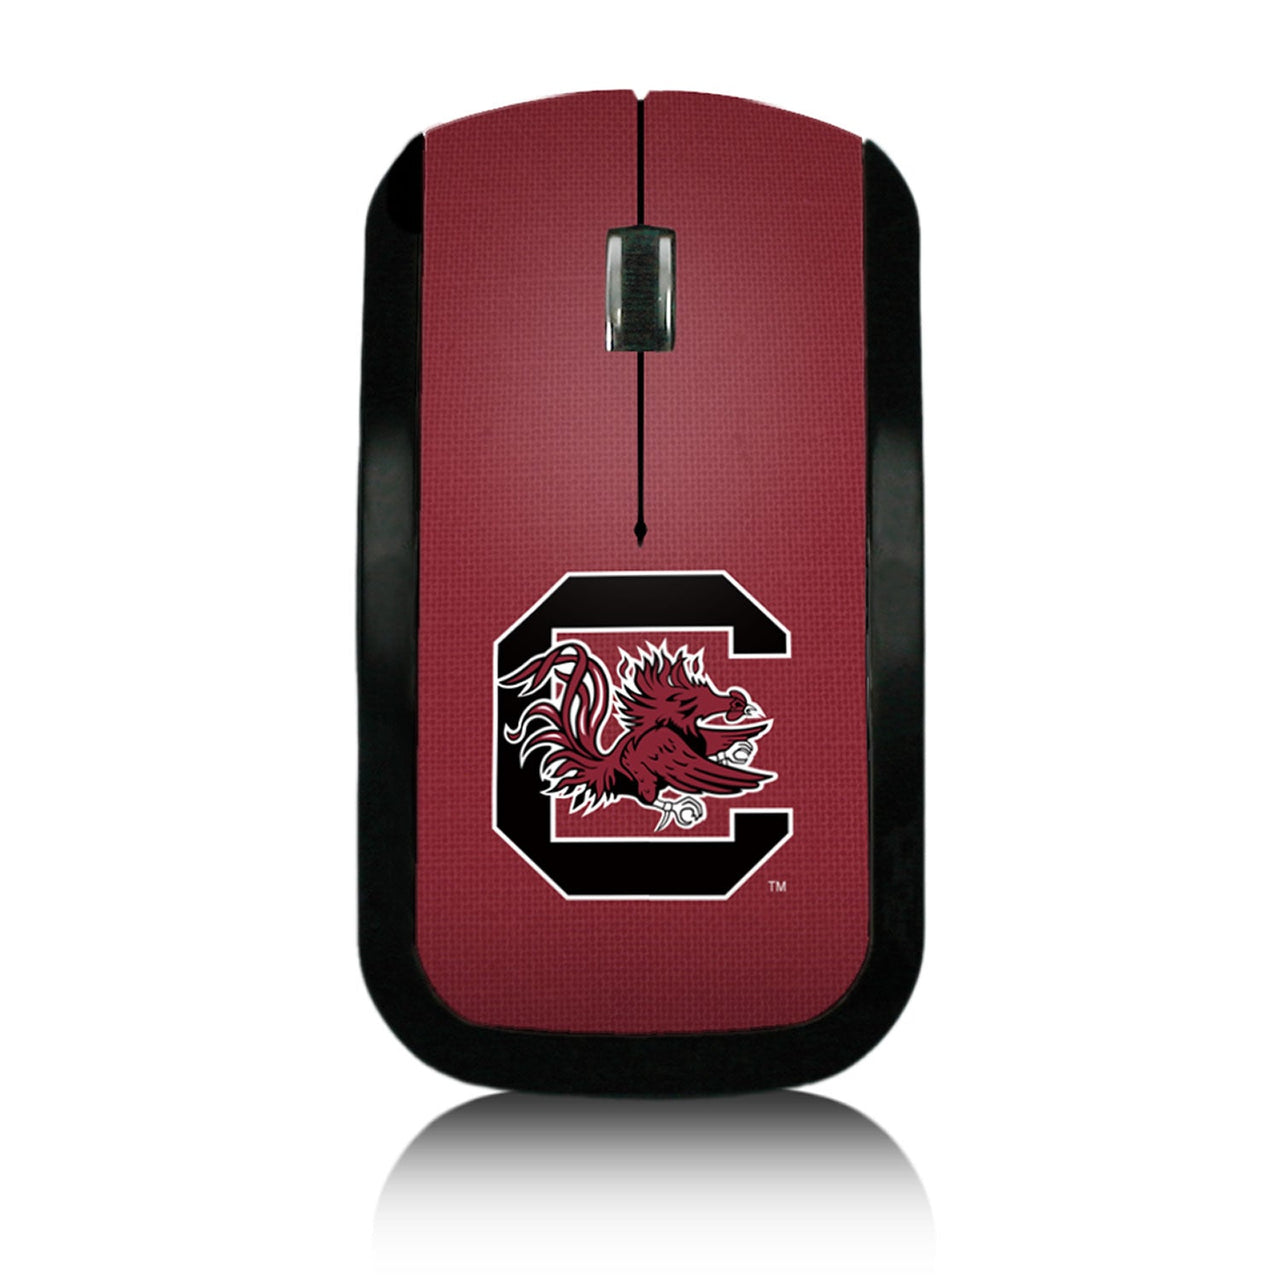 South Carolina Fighting Gamecocks Solid Wireless USB Mouse-0